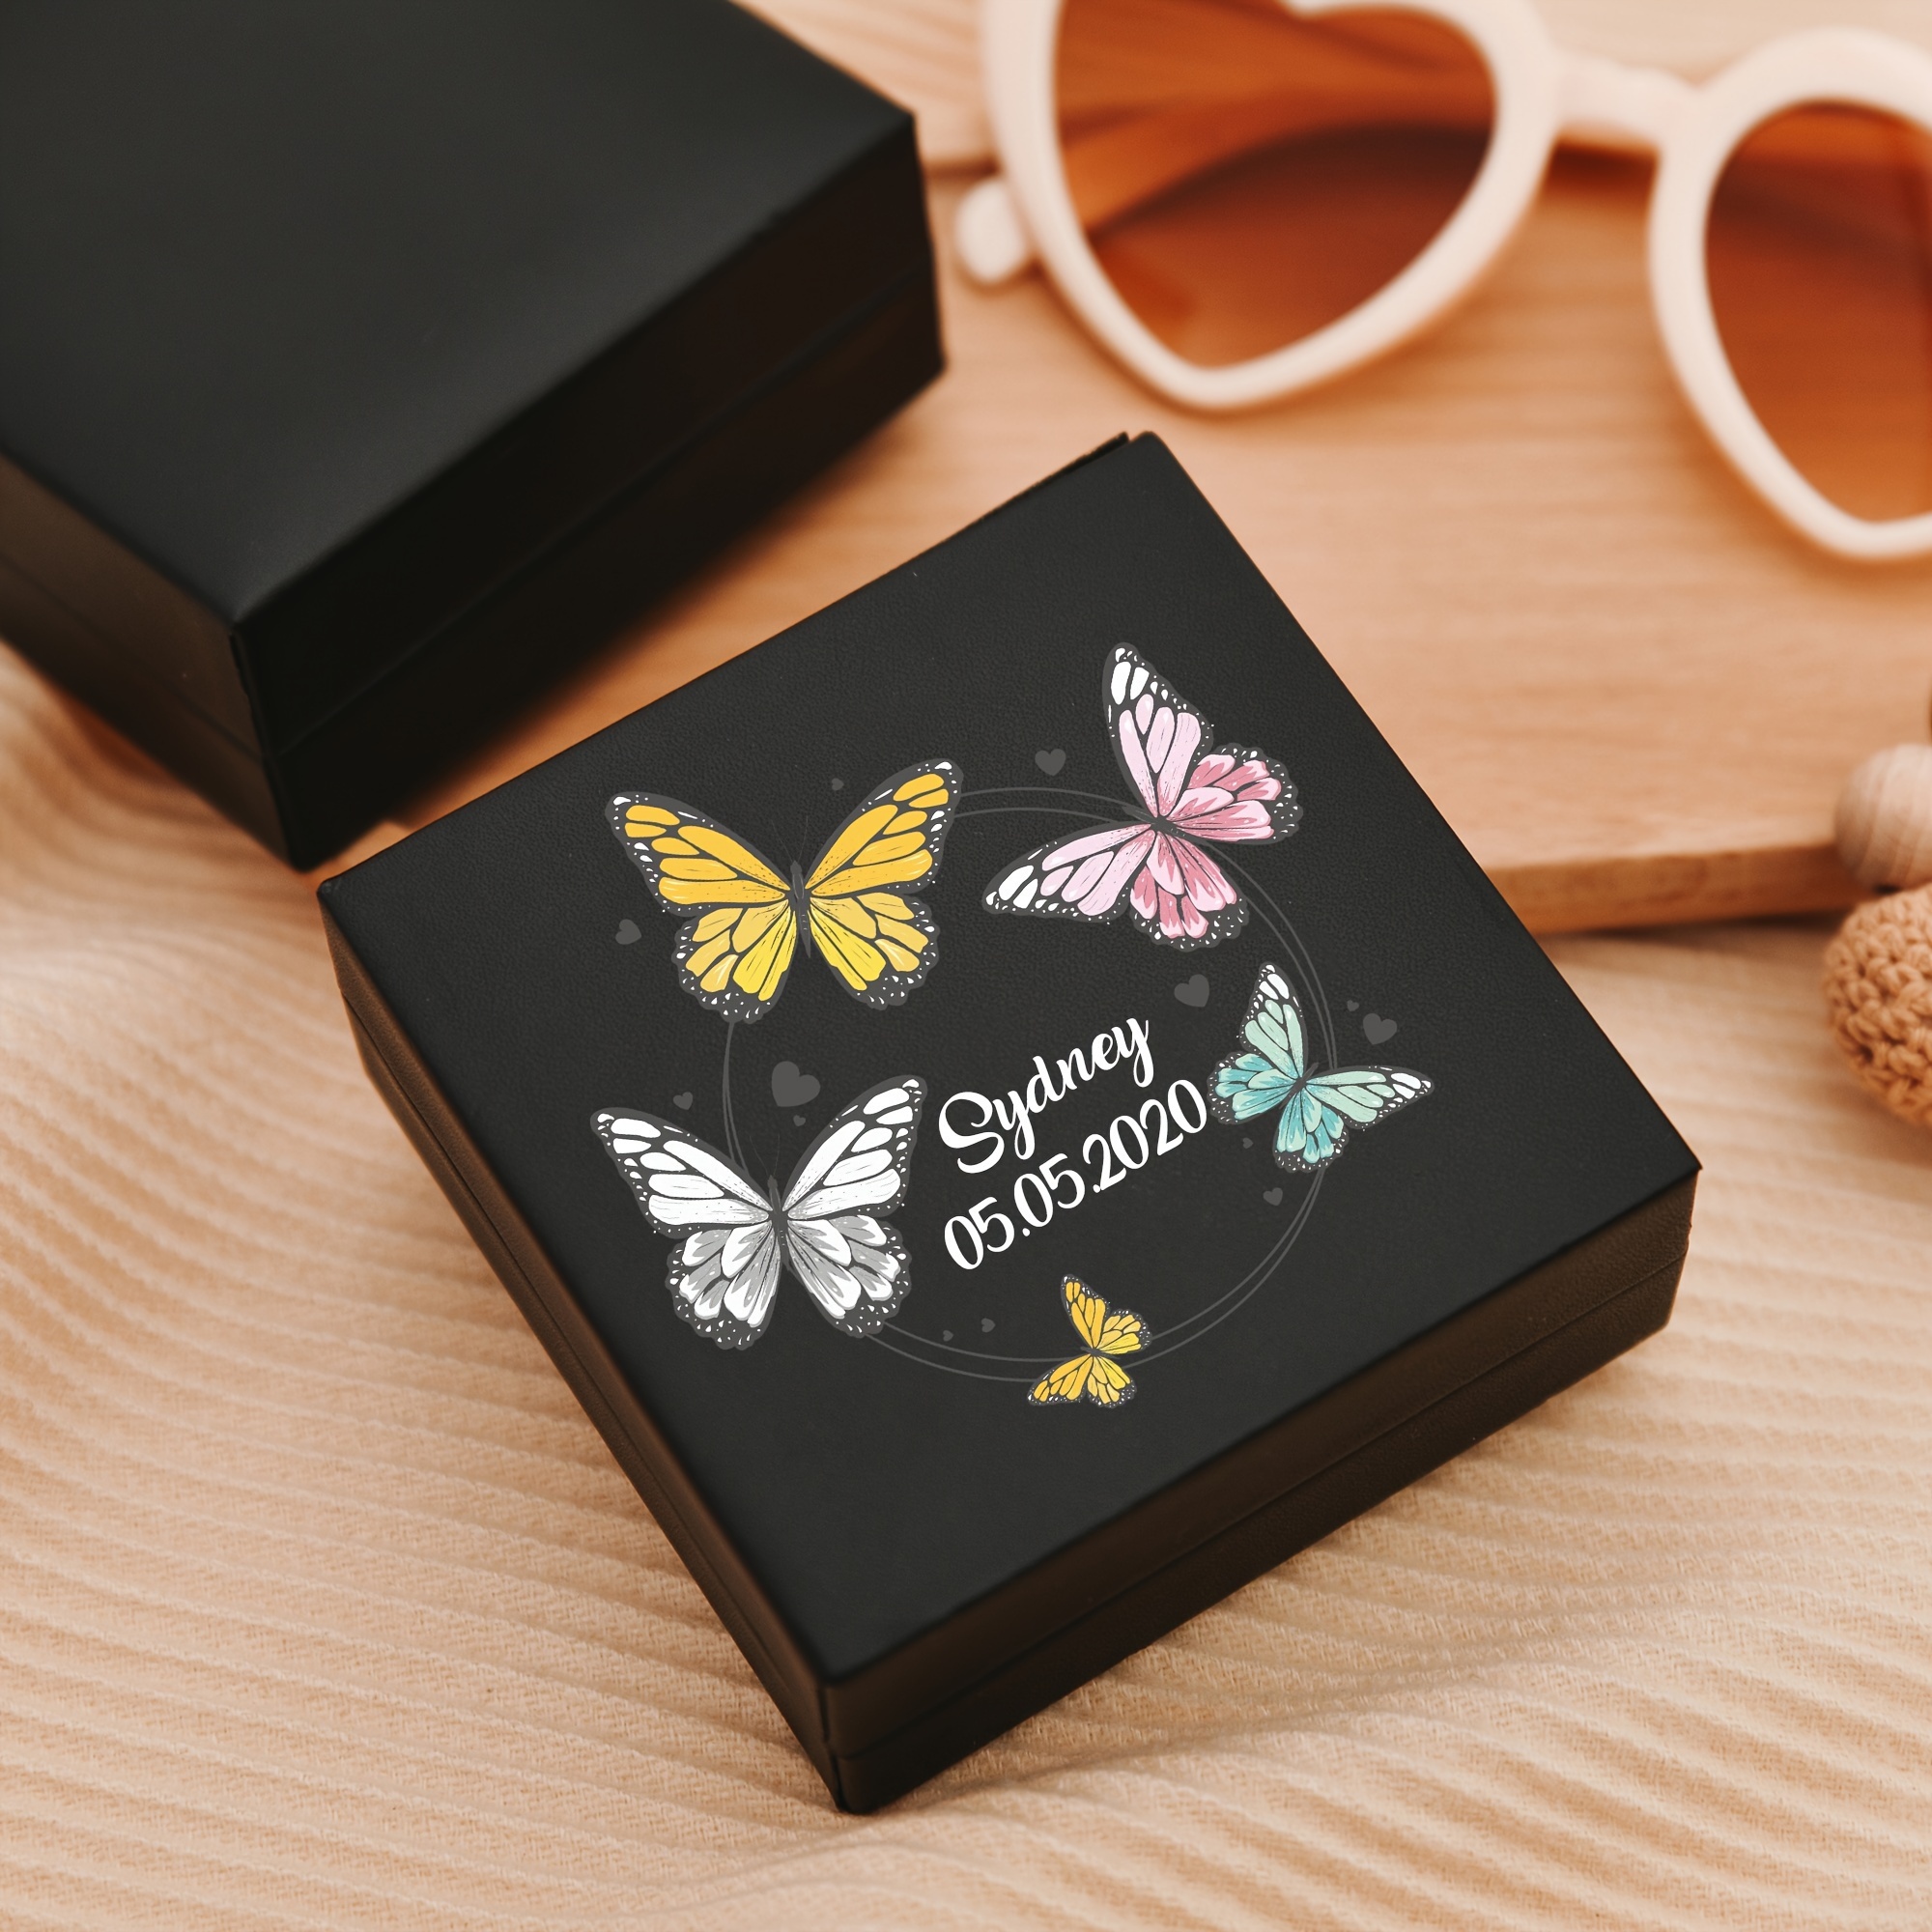  Personalized Jewelry Boxes, Bridesmaid Jewelry Box, Bridesmaid  Gift, Personalized Gift for Women